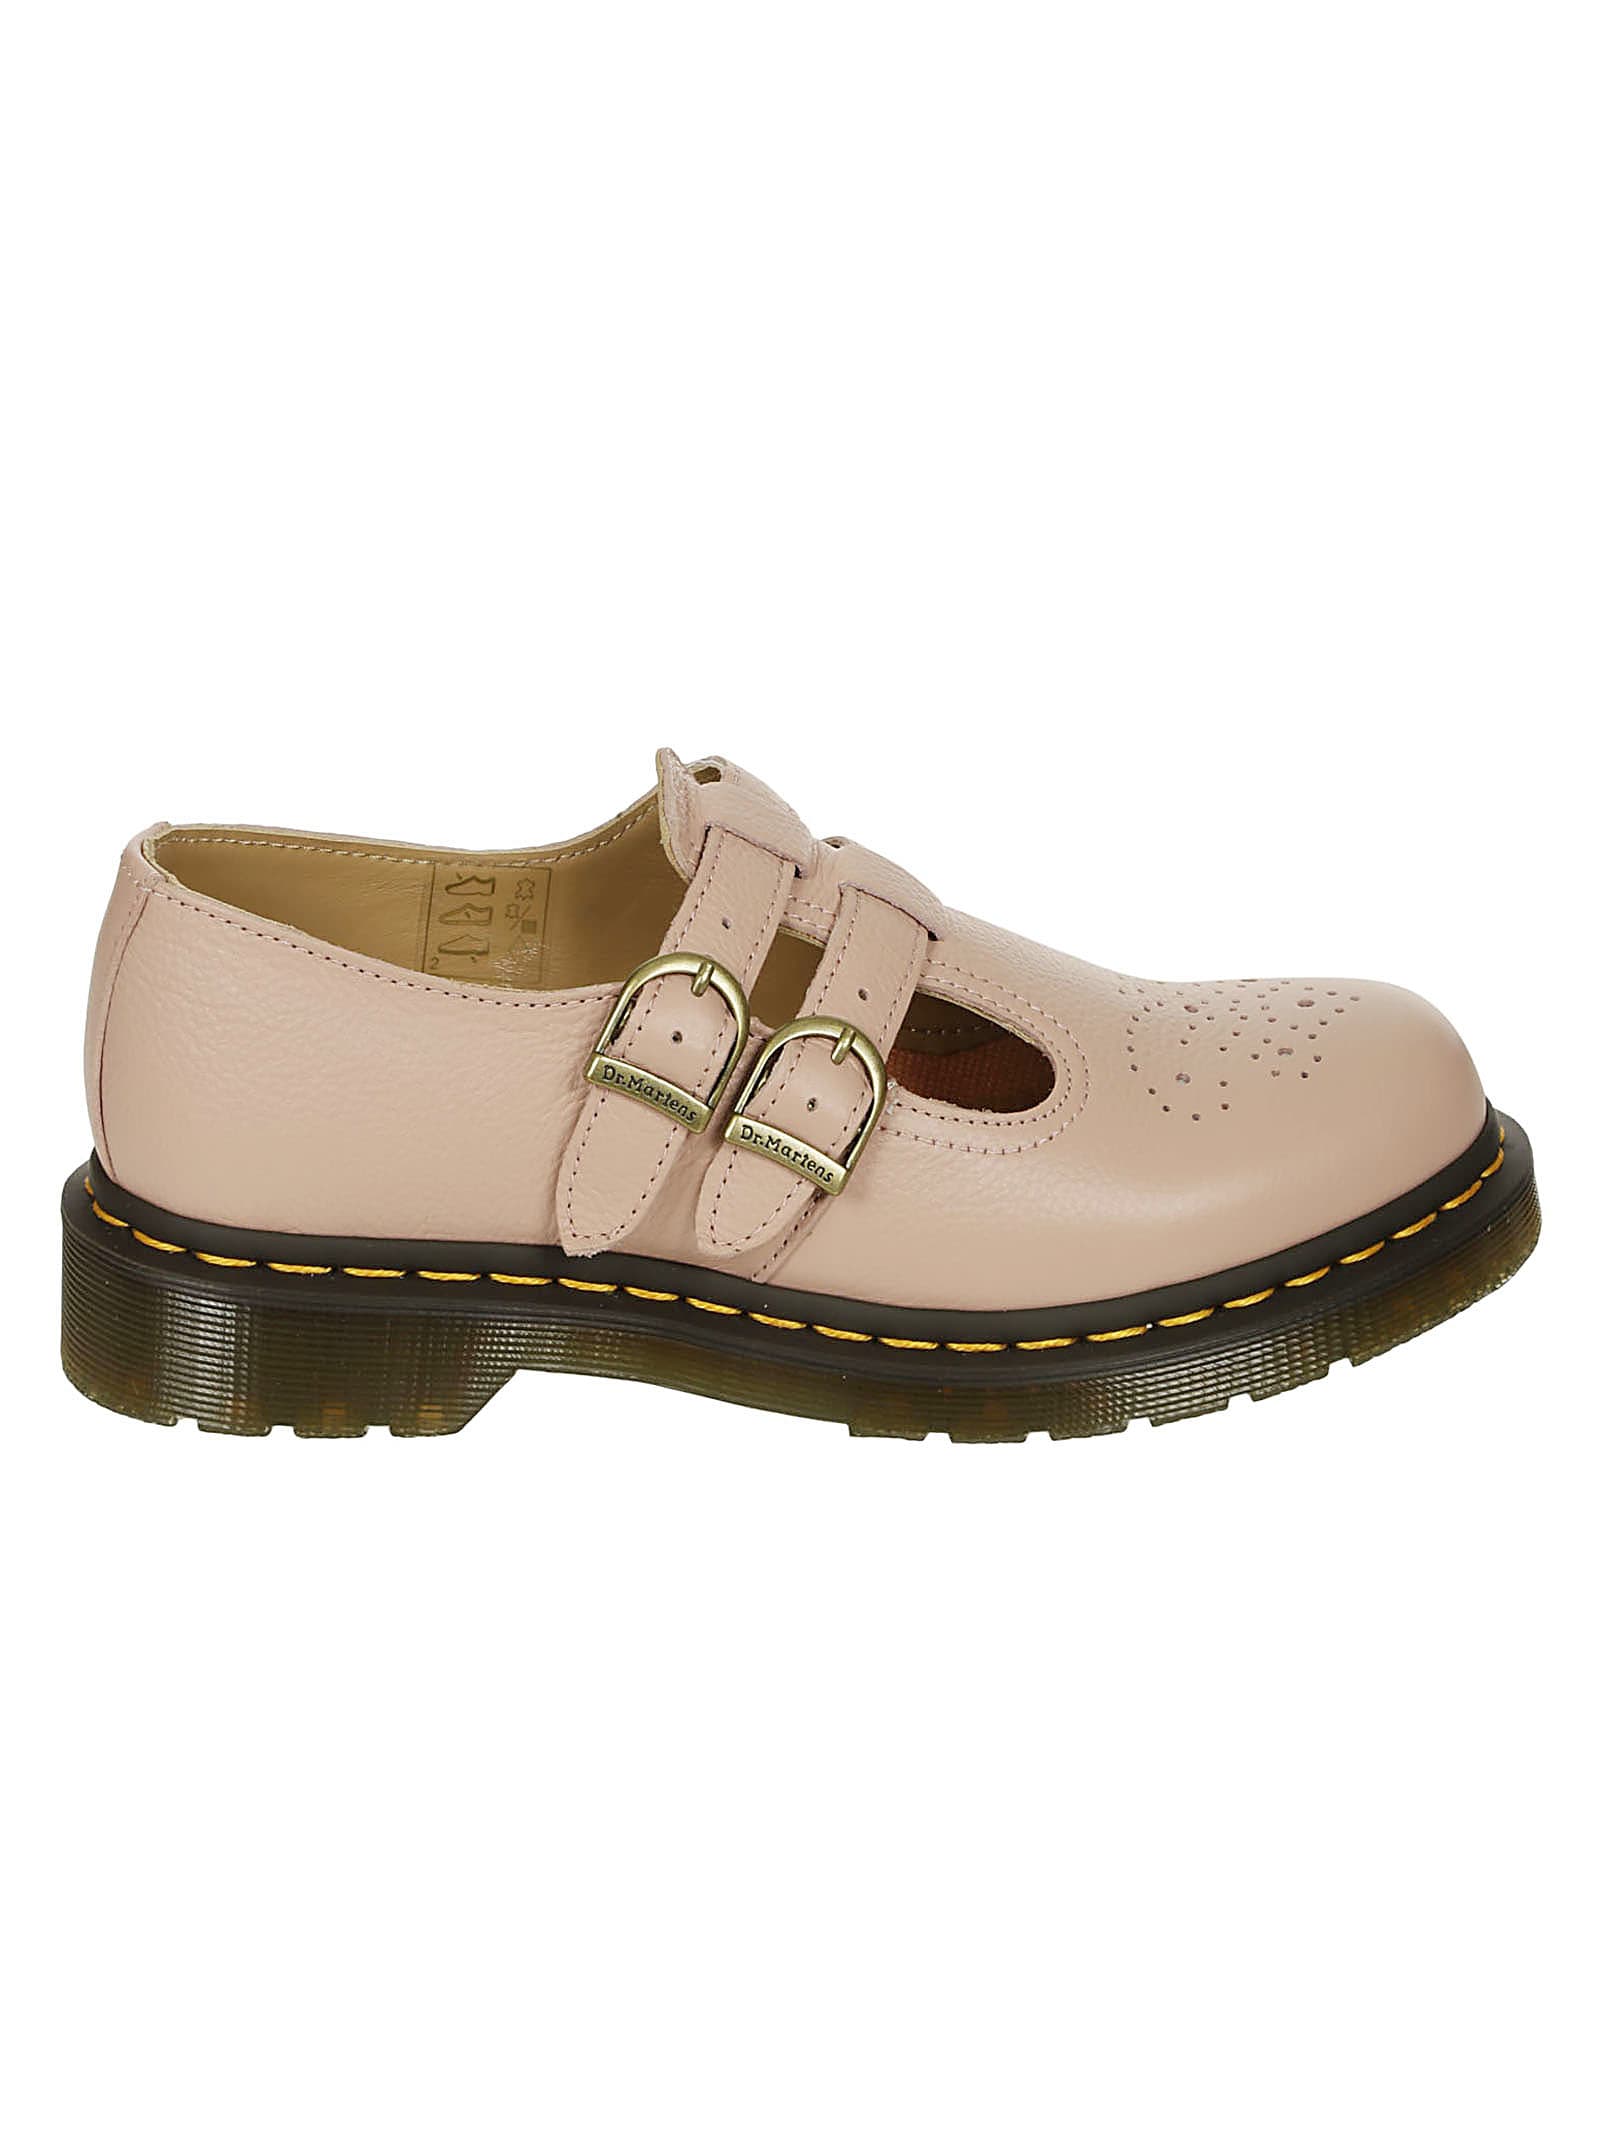 DR. MARTENS' 8065 MARY JANE